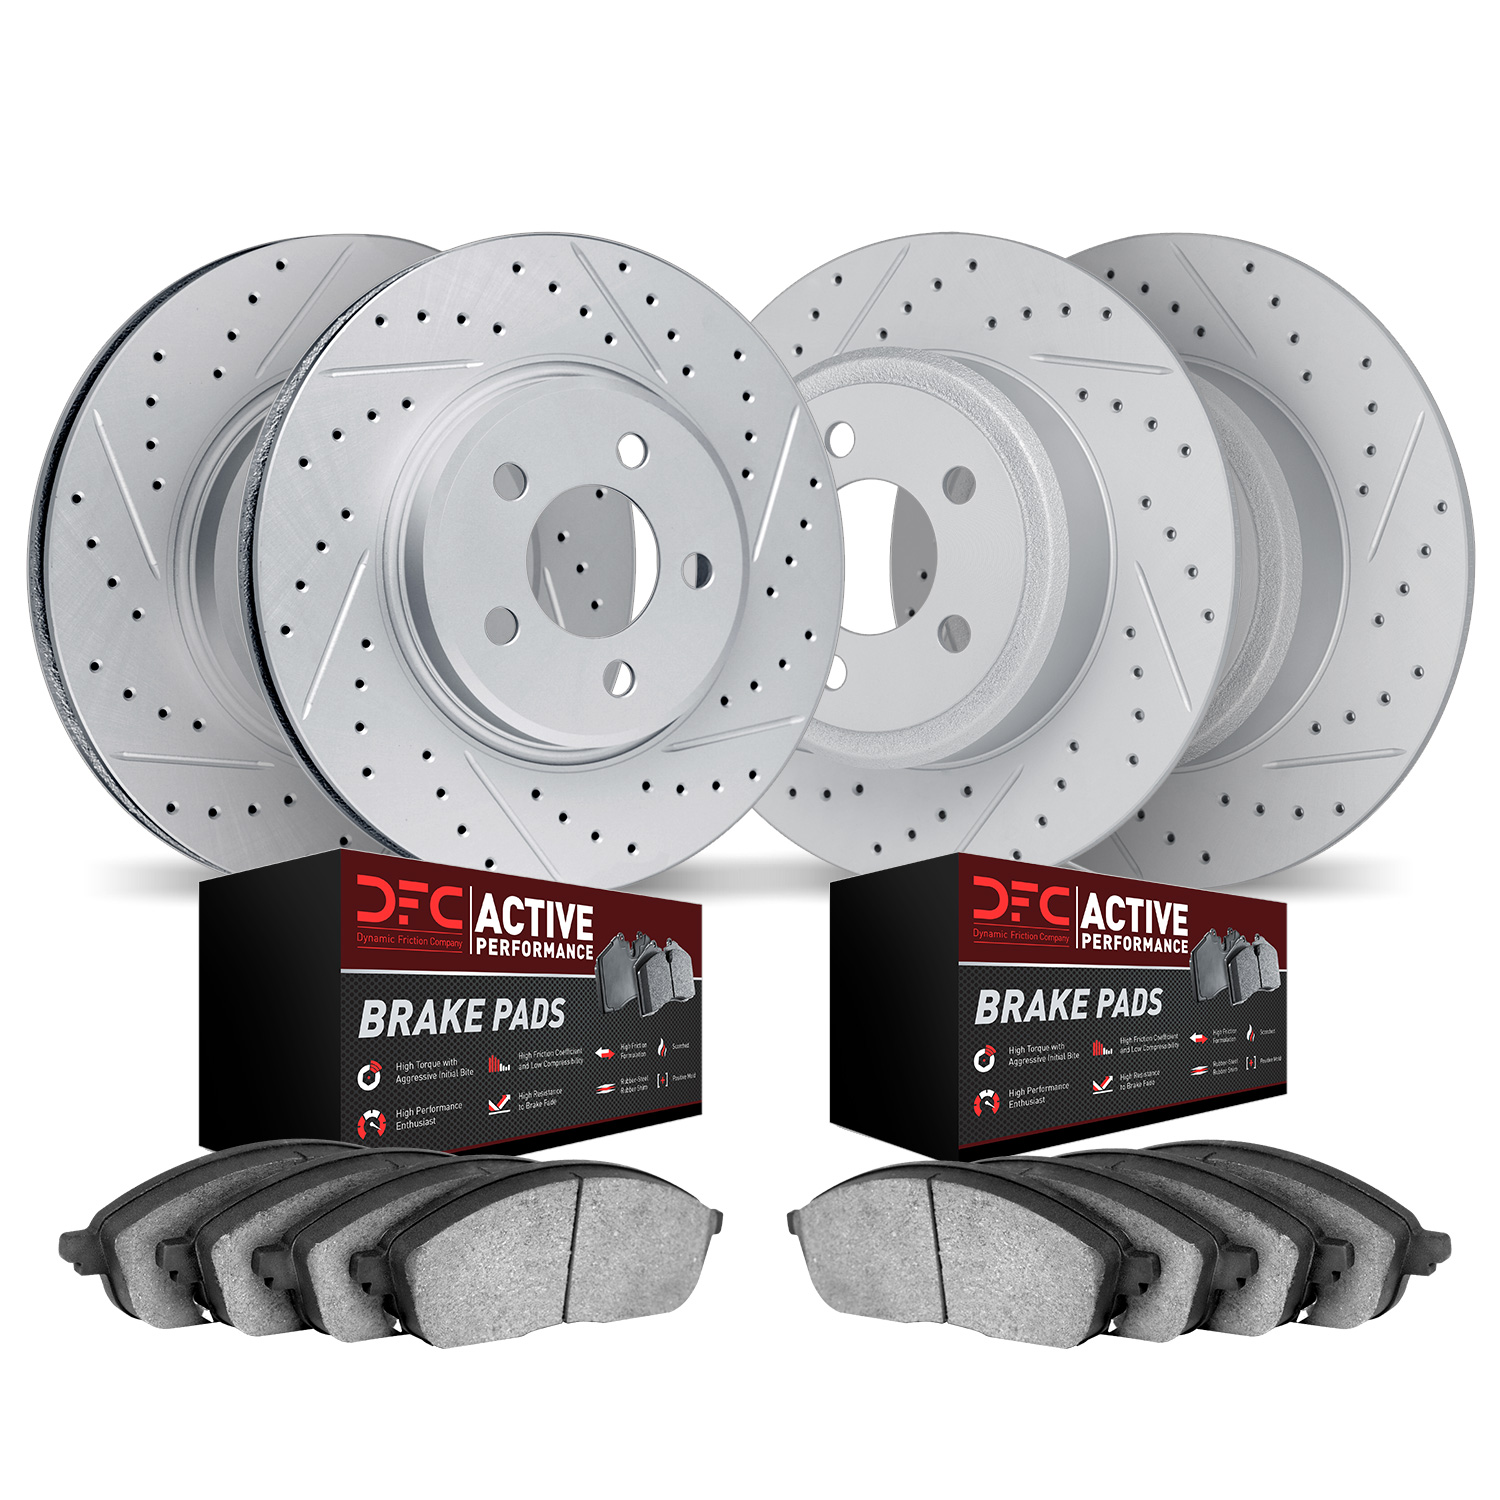 2704-13068 Geoperformance Drilled/Slotted Brake Rotors with Active Performance Pads Kit, 2009-2012 Subaru, Position: Front and R